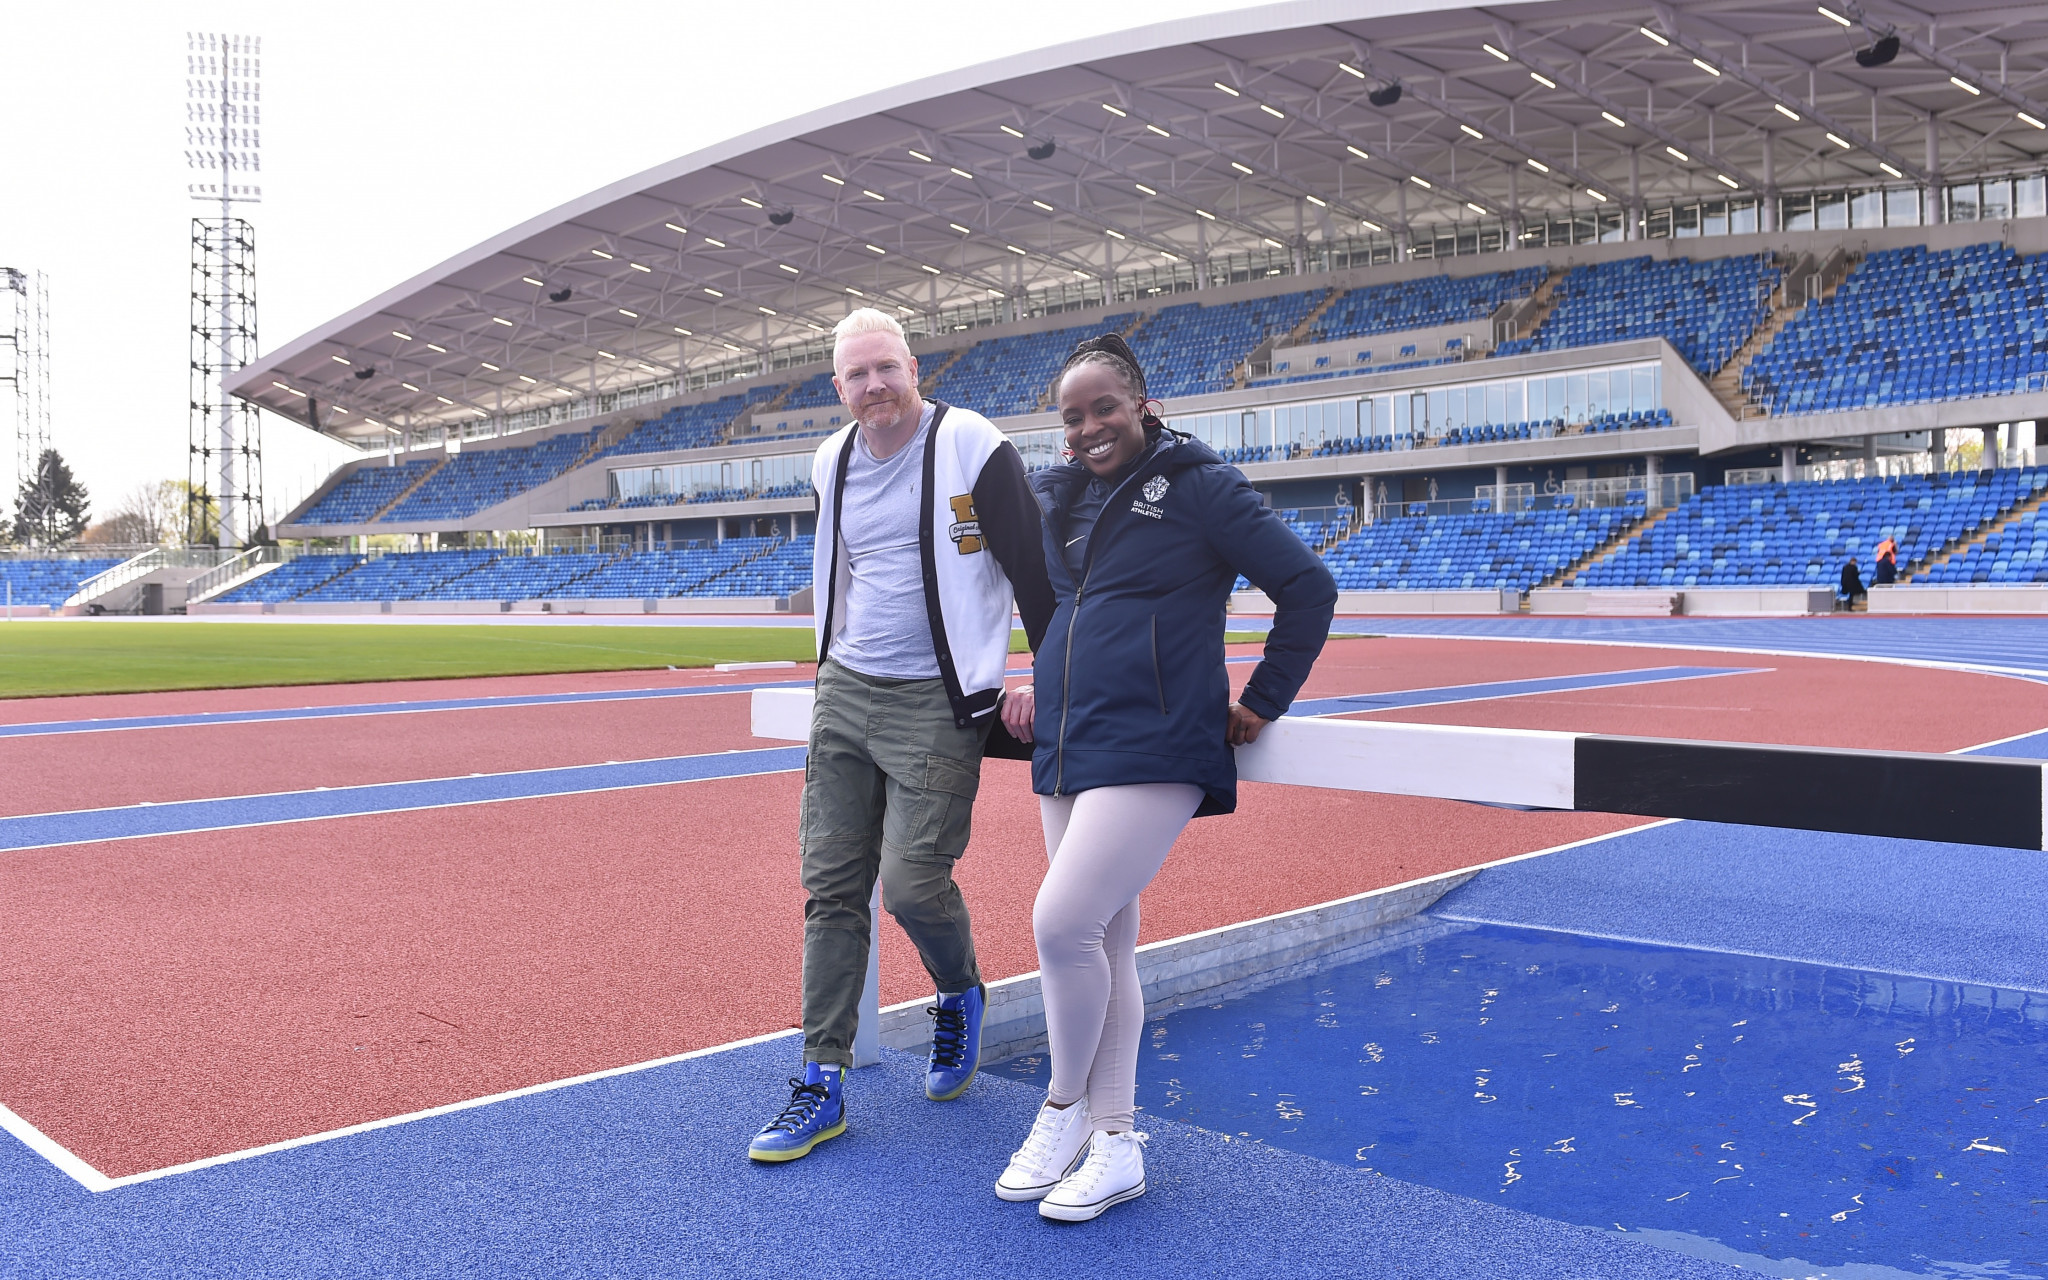 Thomas and Okoro have been blown away by the transformation of the Alexander Stadium prior to the Commonwealth Games ©British Athletics and Getty Images